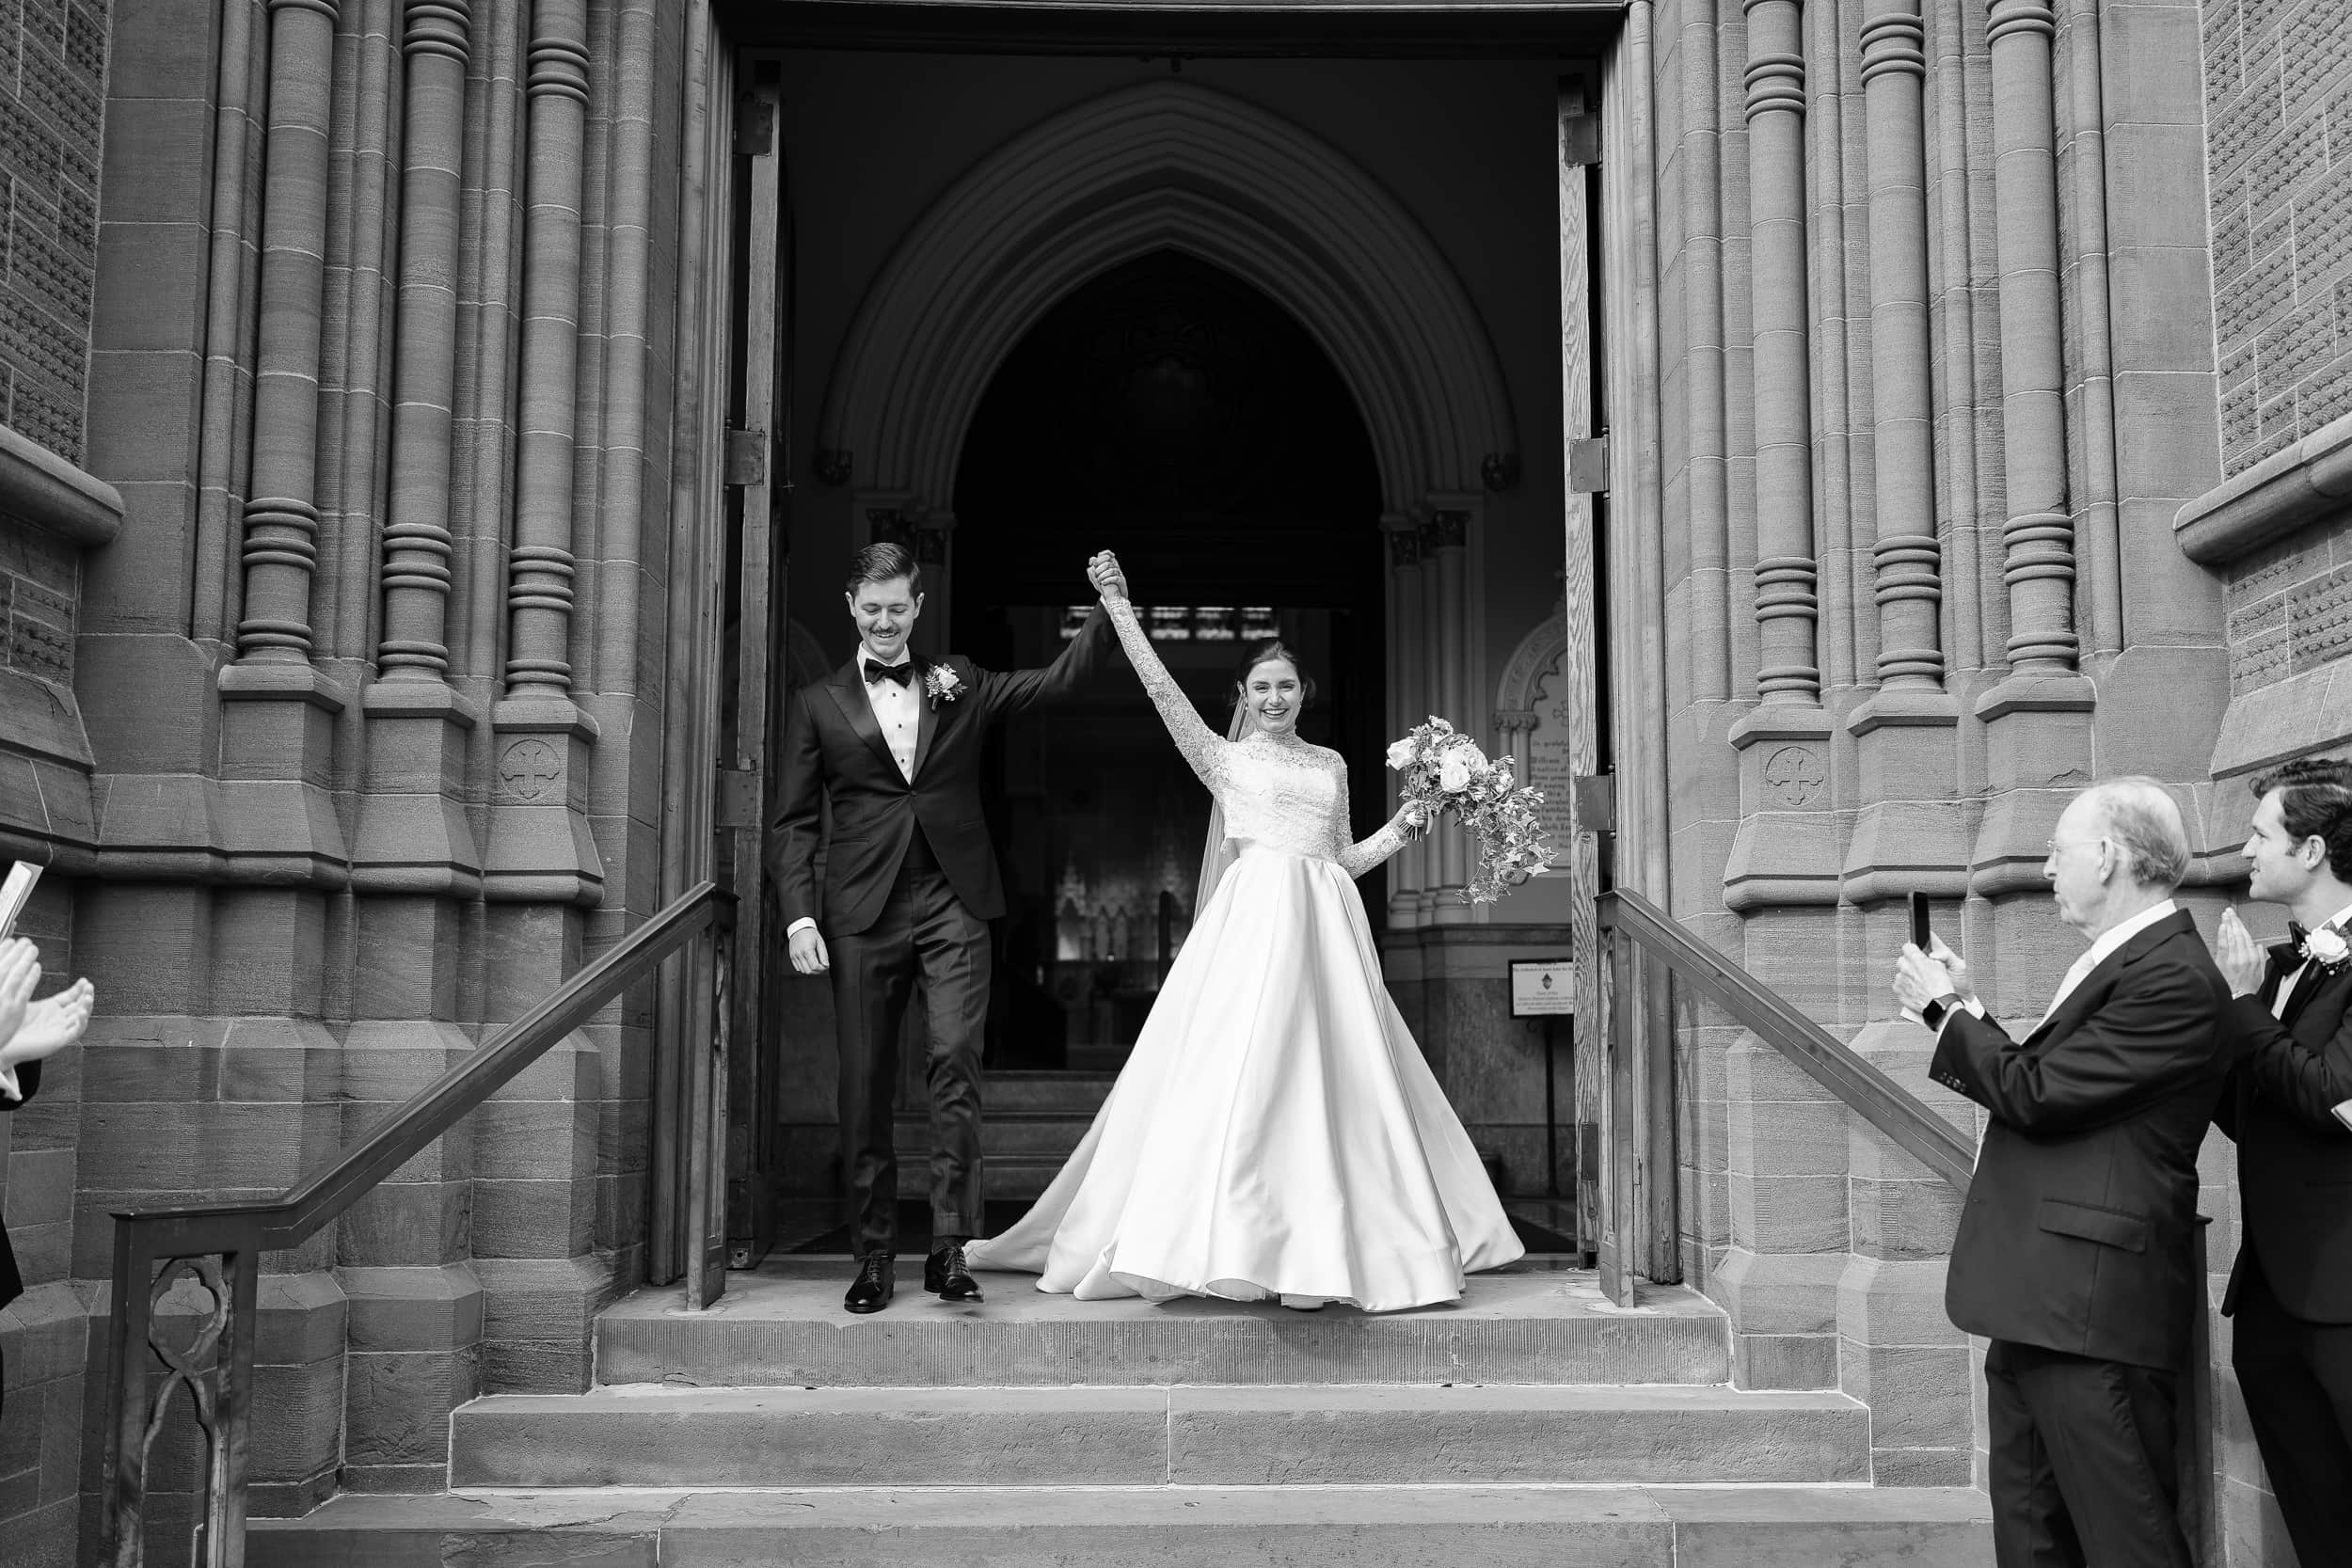 Happy couple walking out of the cathedral in black and white - Cathedral of Saint John Charleston